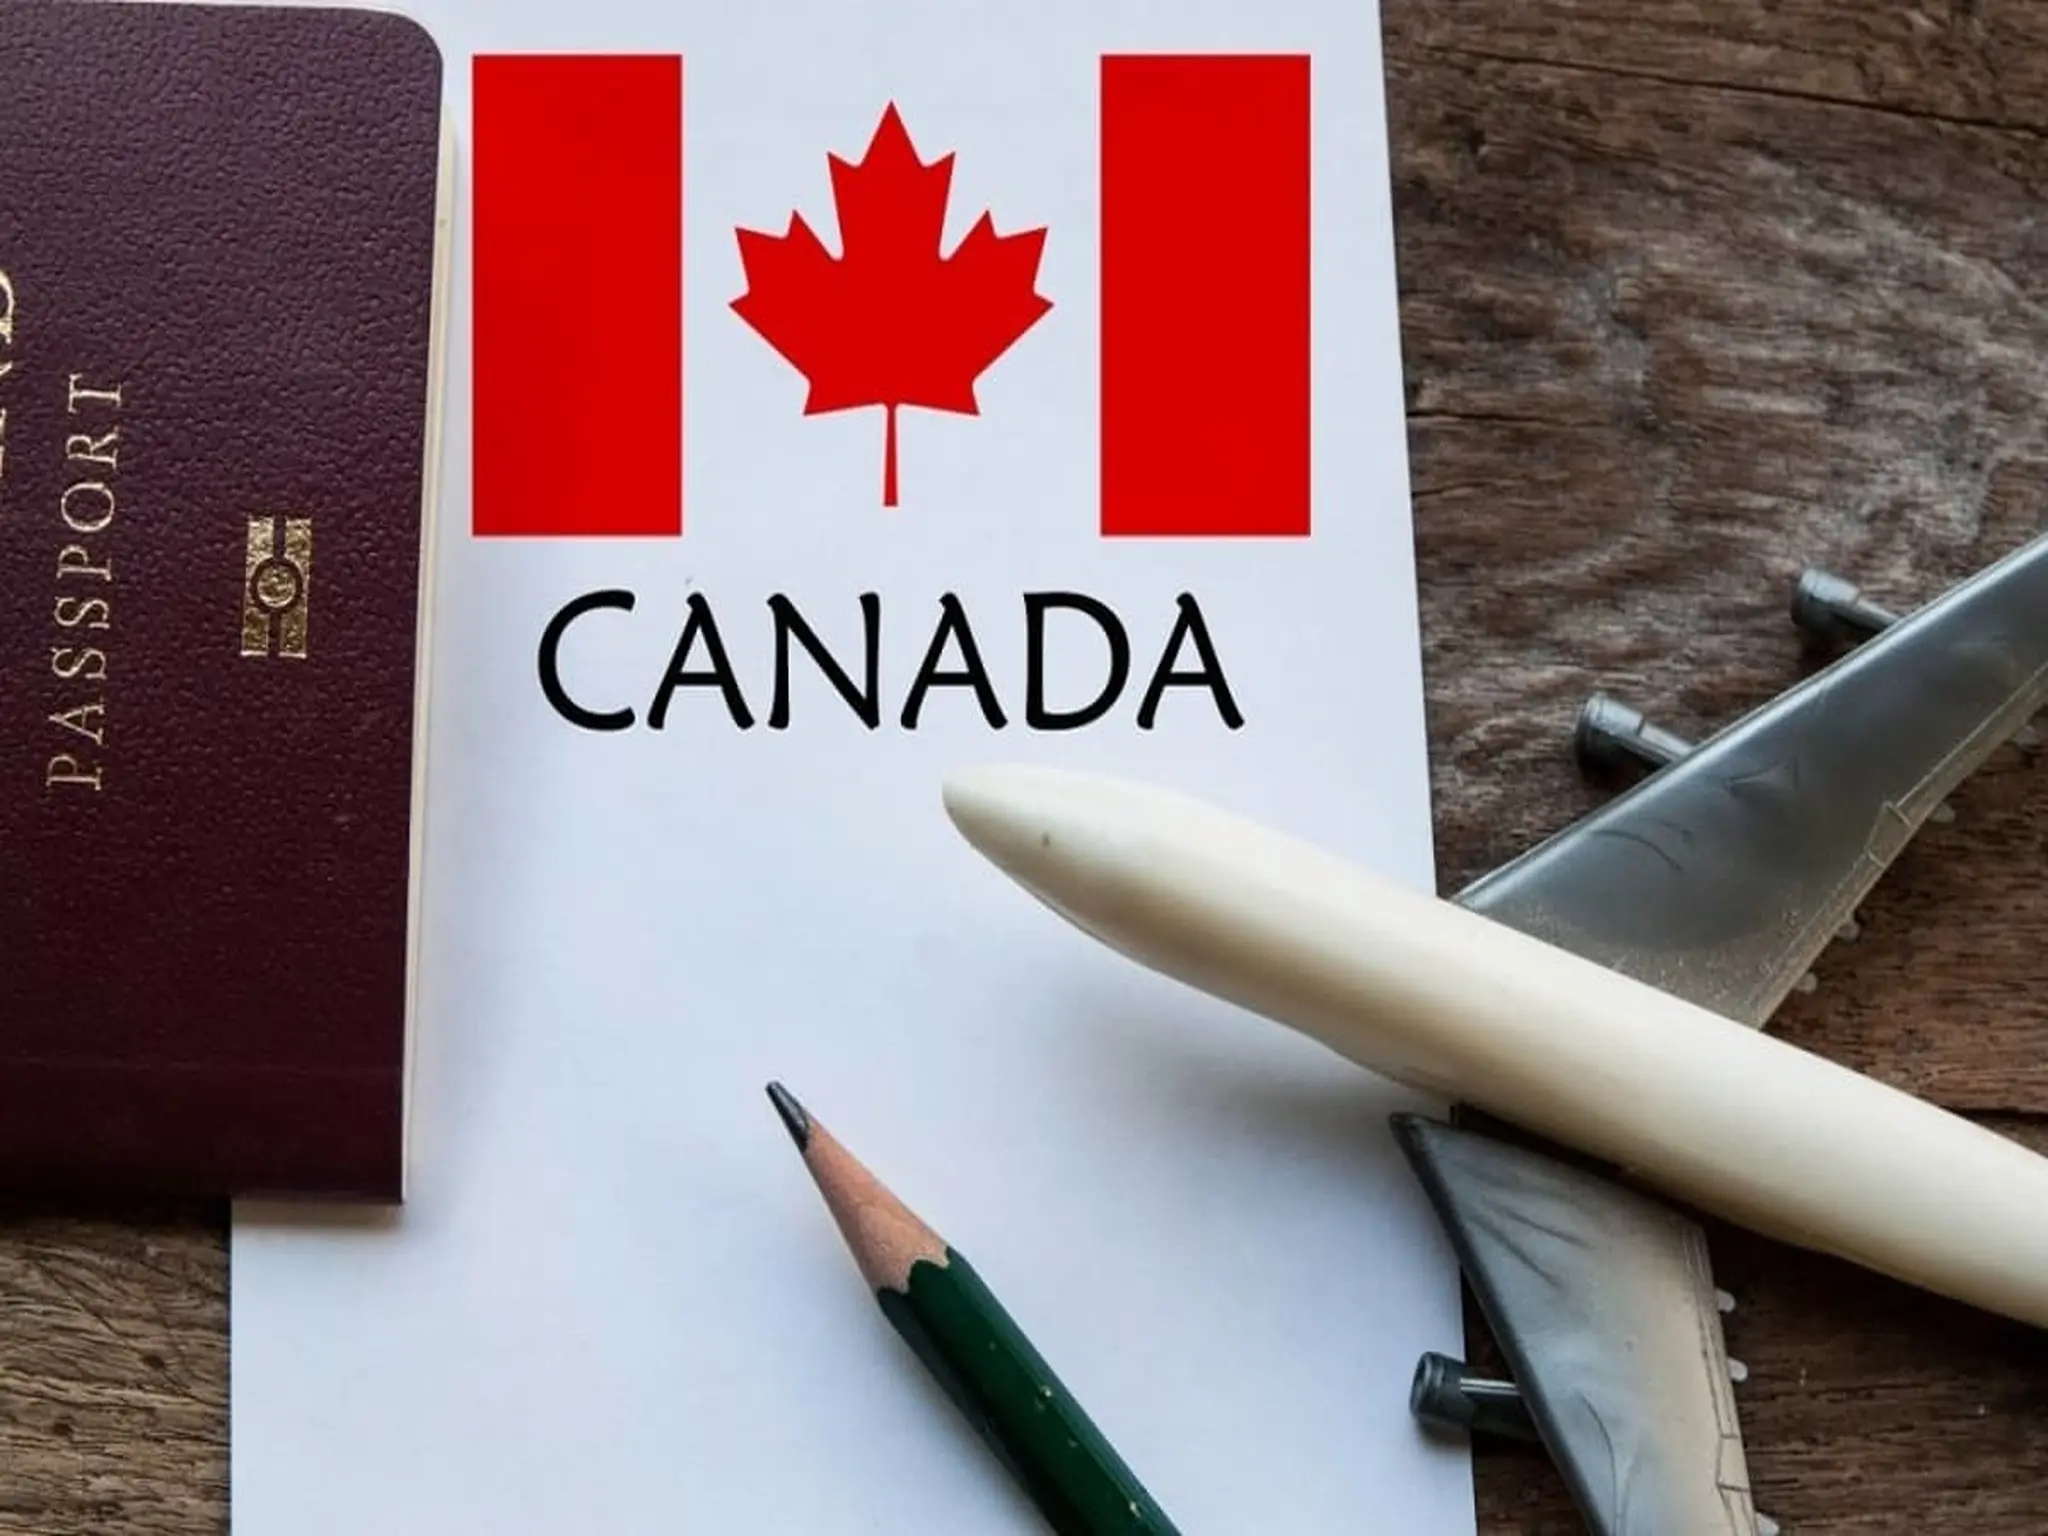 UAE issues a decision regarding obtaining a Canadian visit visa for residents and citizens